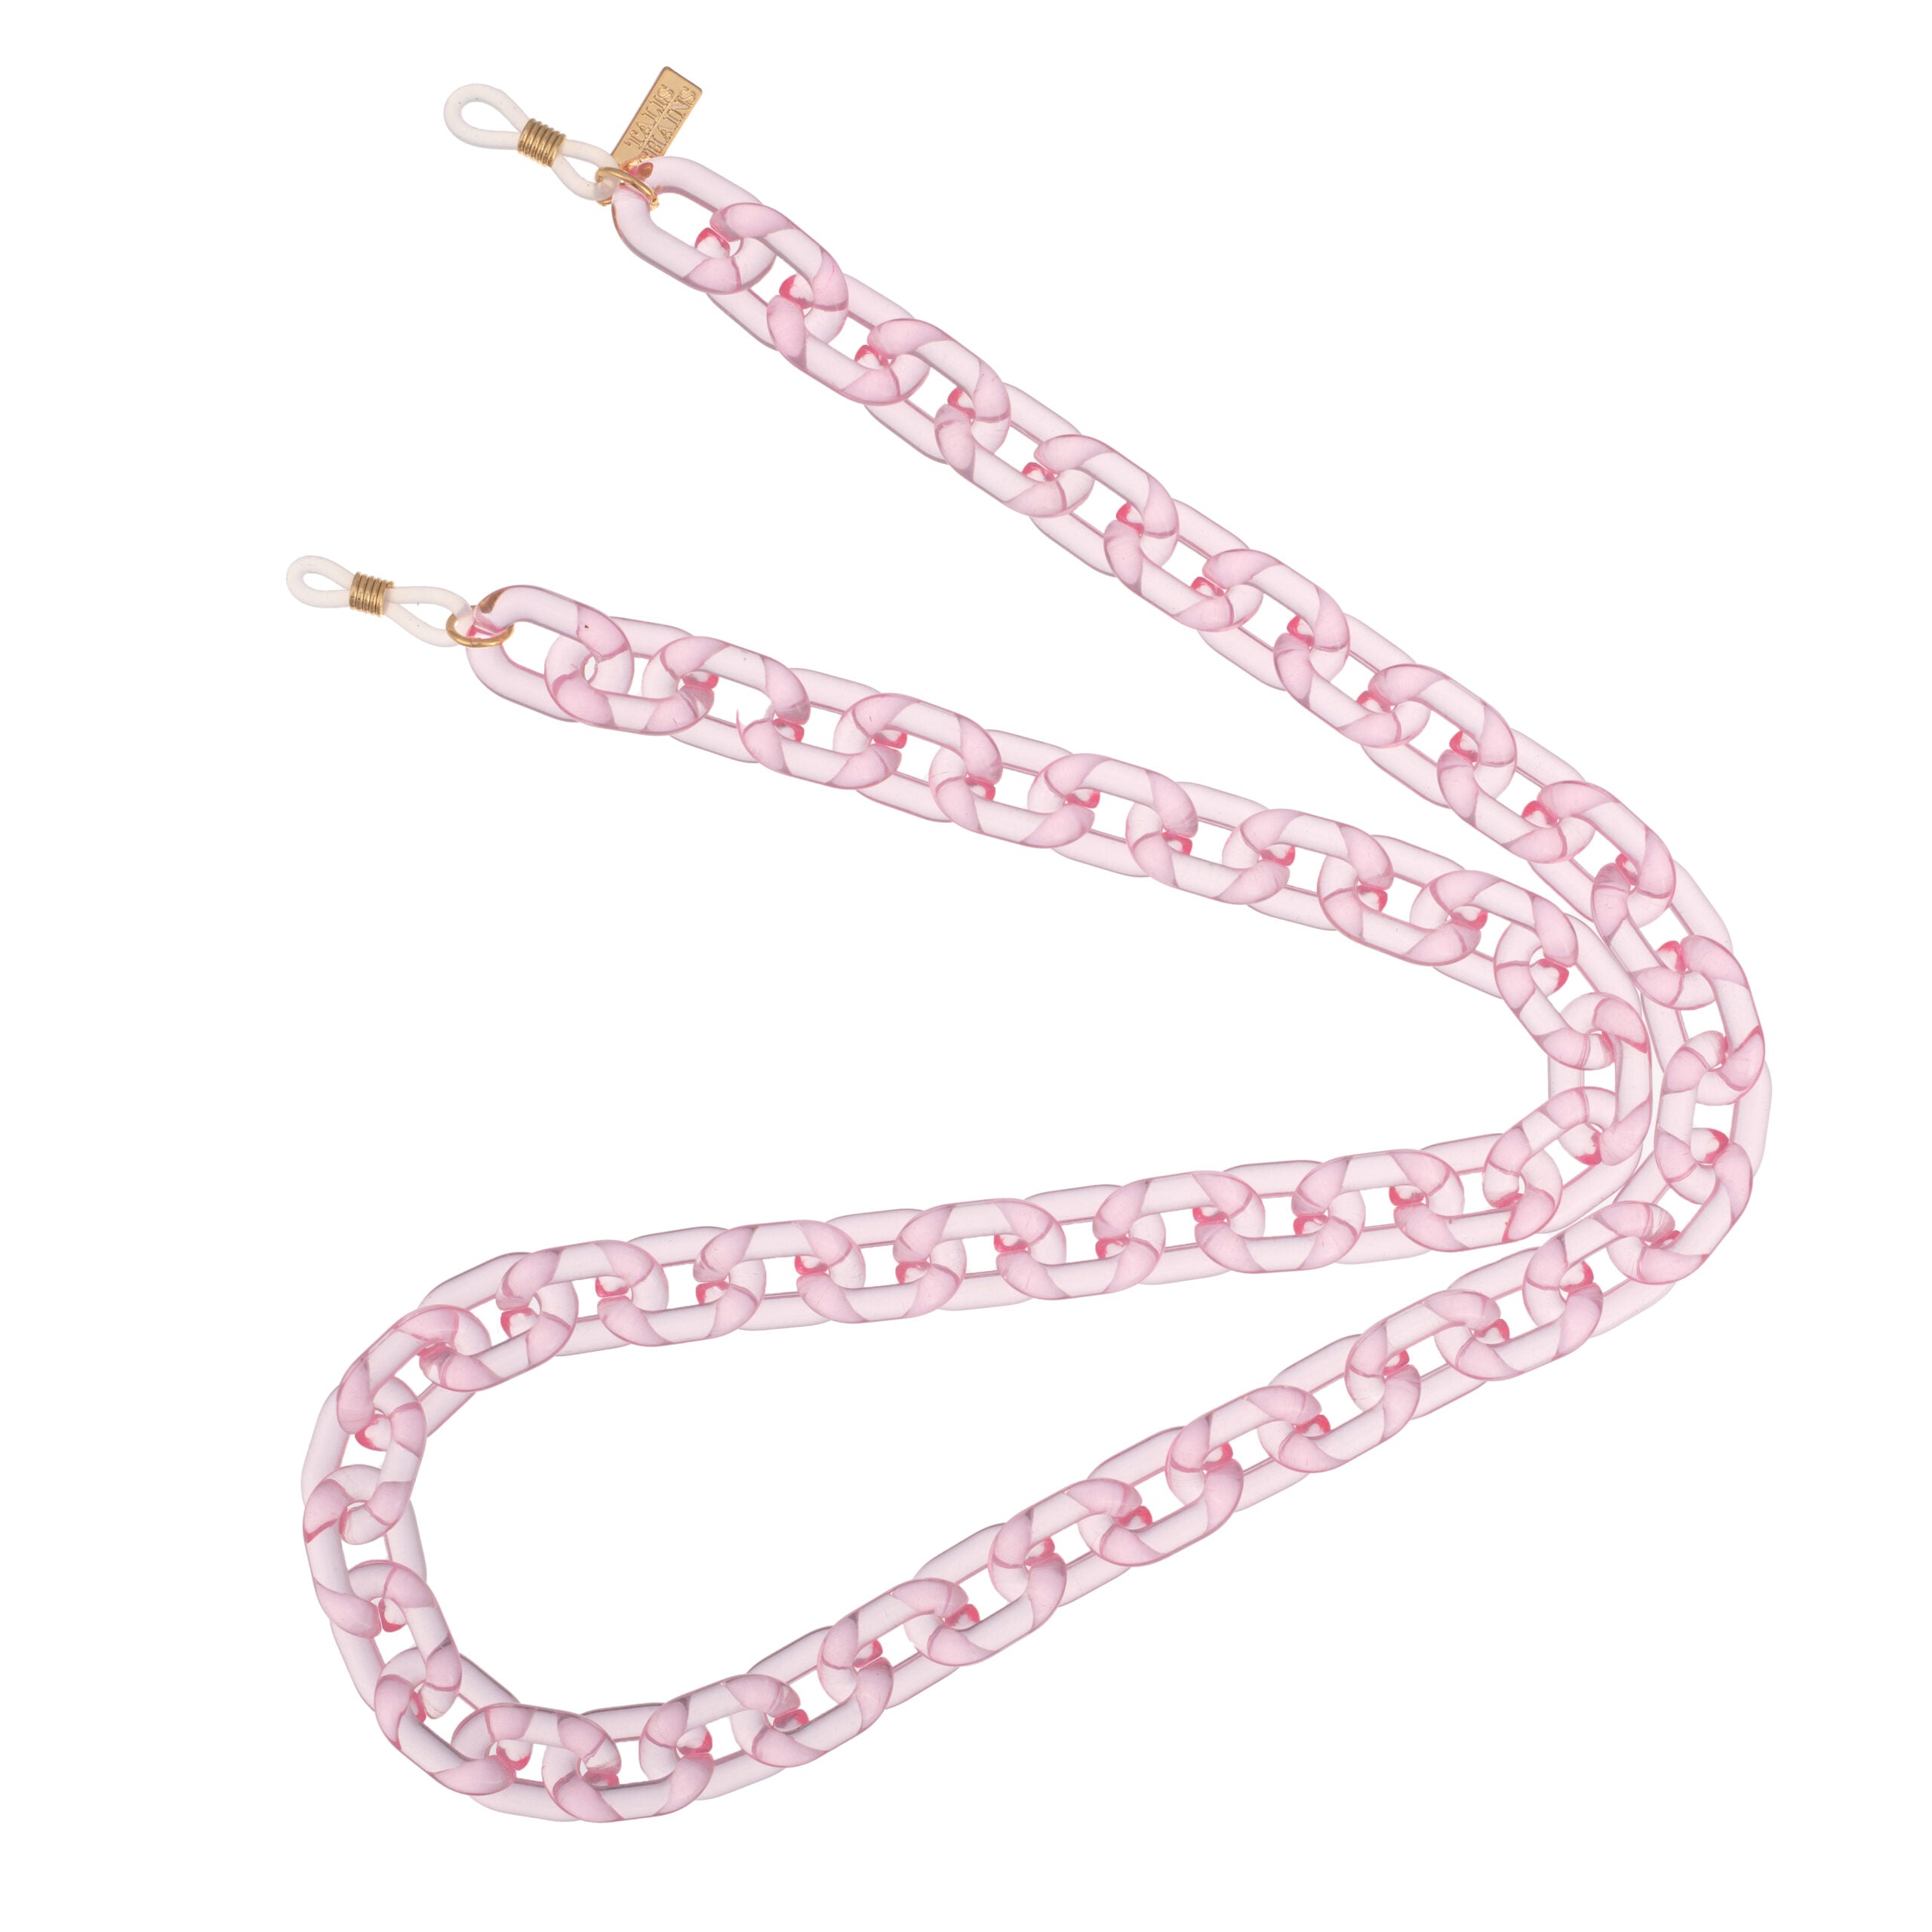 Talis Chains Resin Sunglasses Chain - Pink